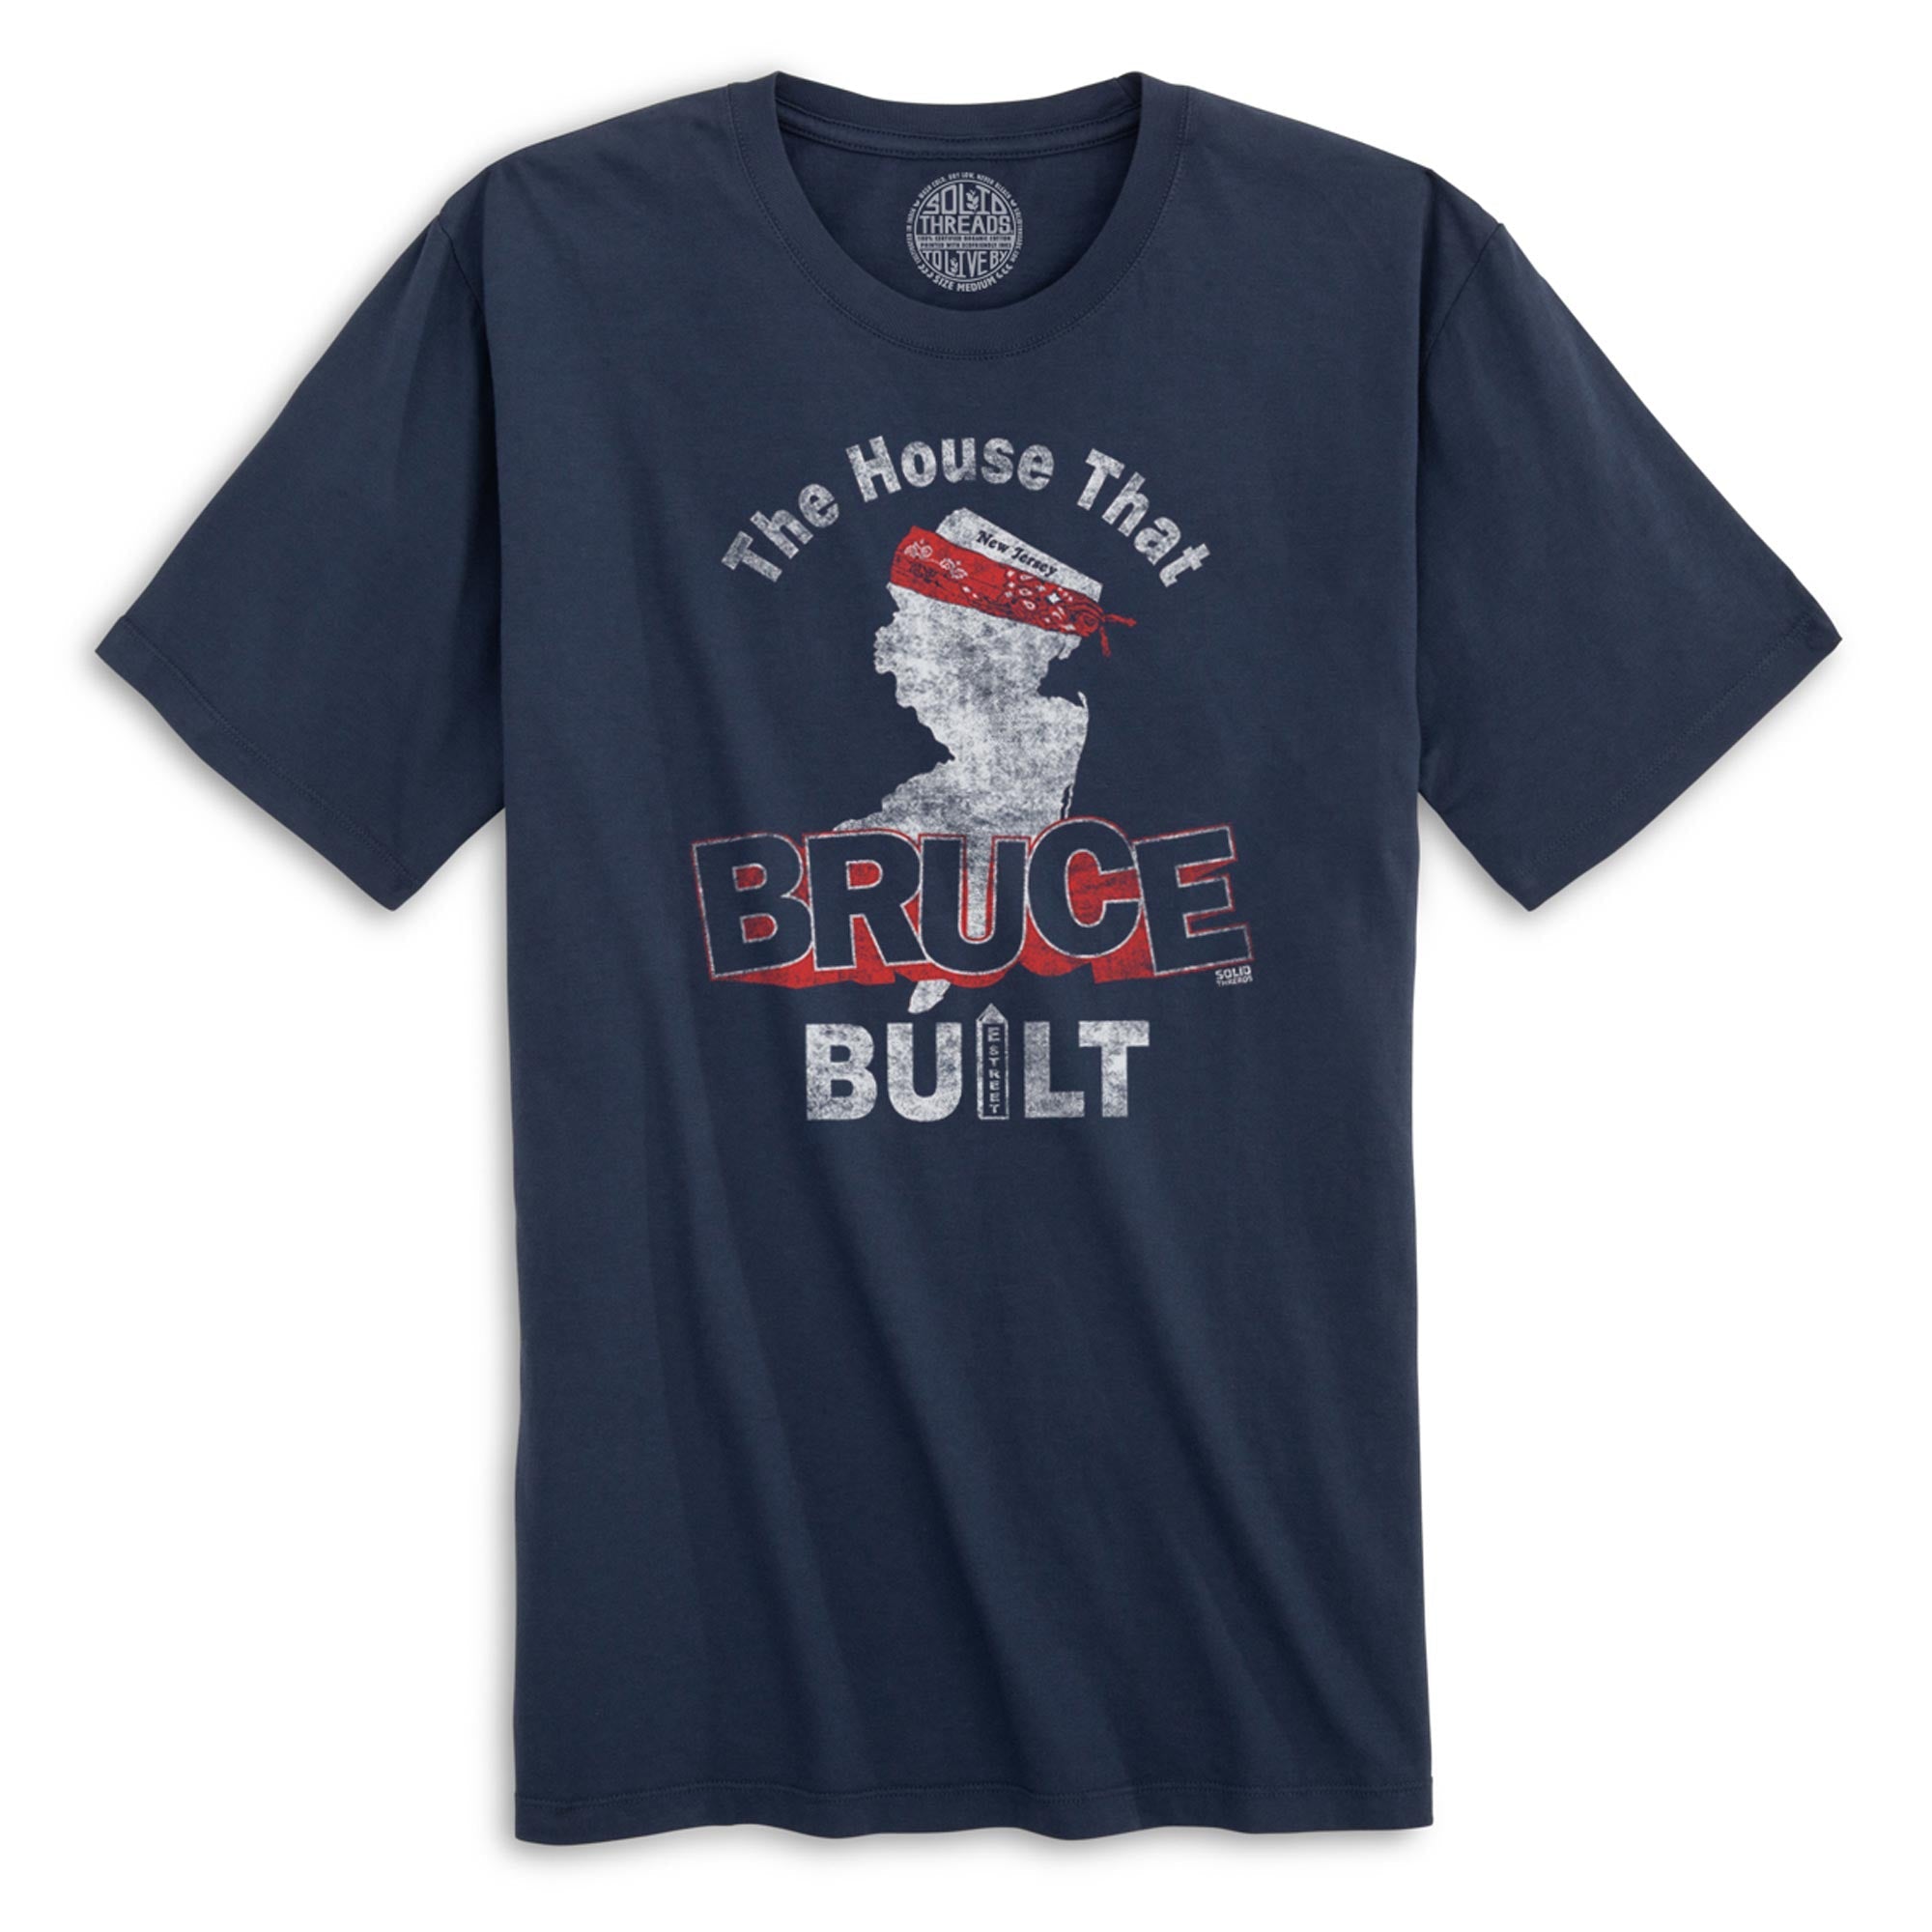 The House That Bruce Built Vintage Organic Cotton T-shirt | Cool Bruce Nj Springsteen Tee | Solid Threads